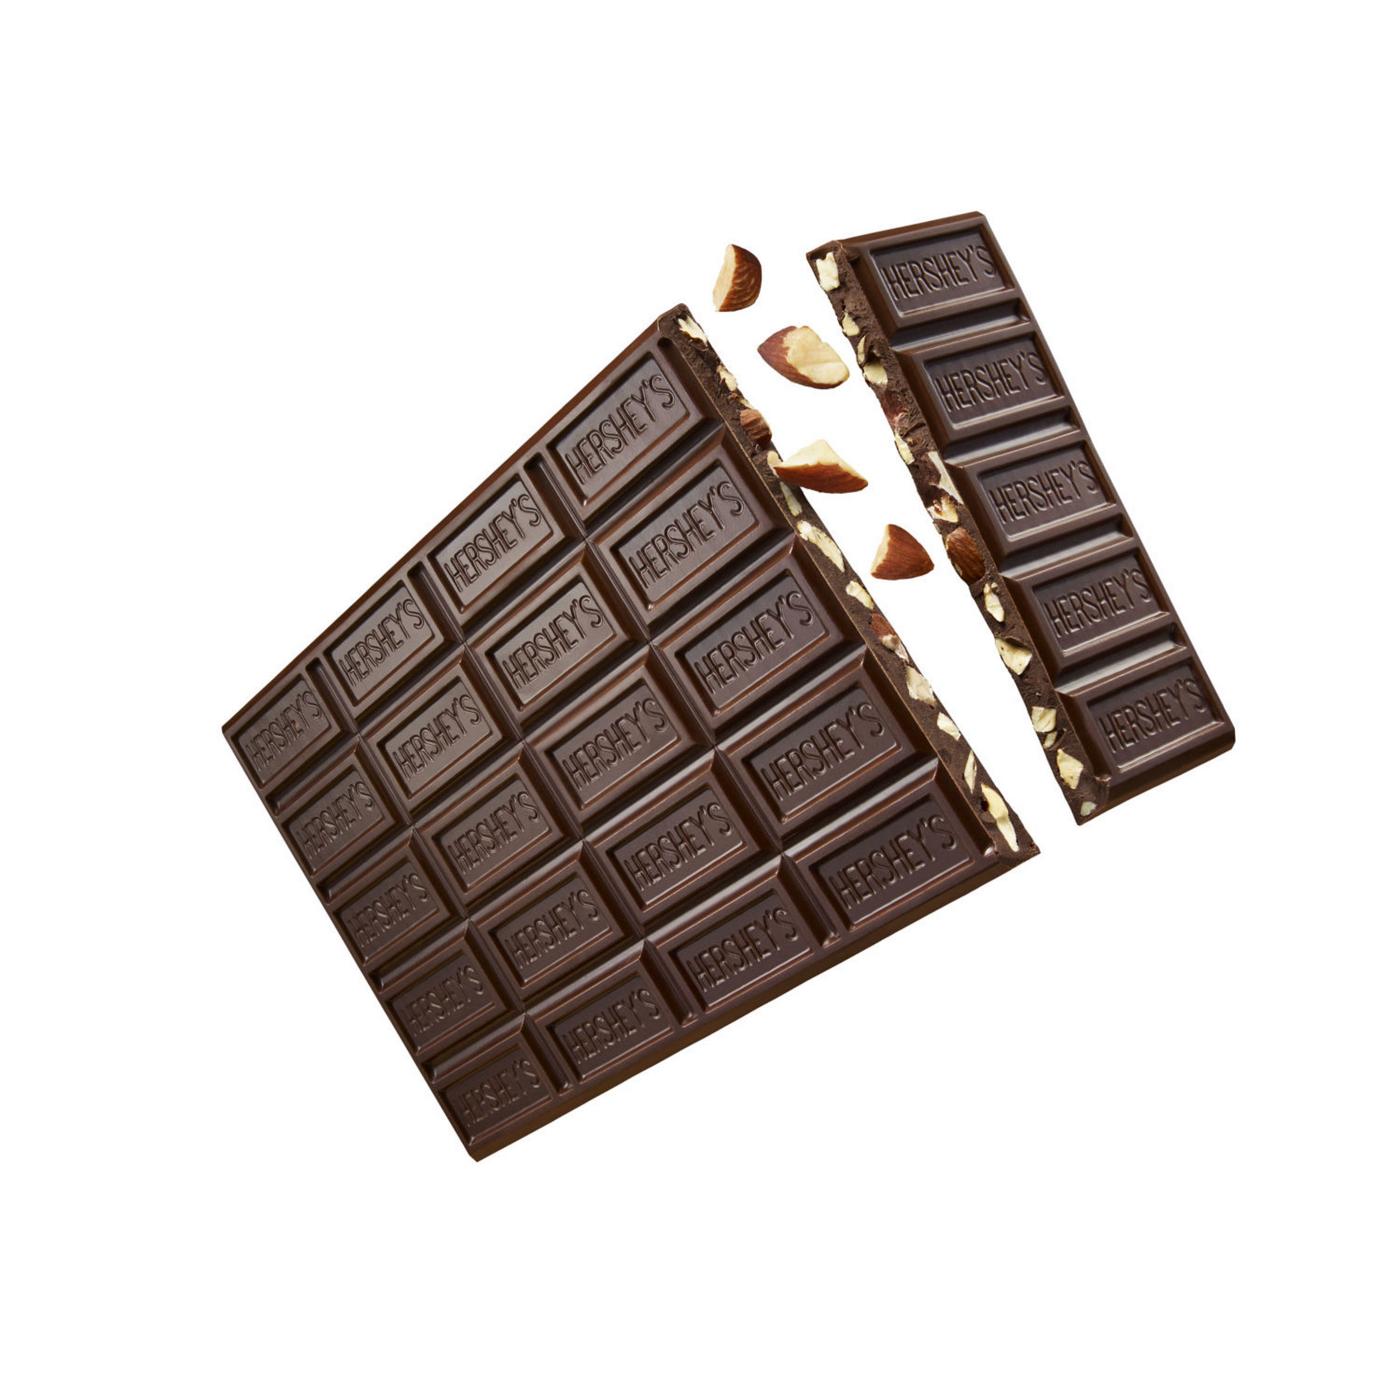 Hershey's Special Dark Chocolate with Almonds Giant Candy Bar; image 4 of 6